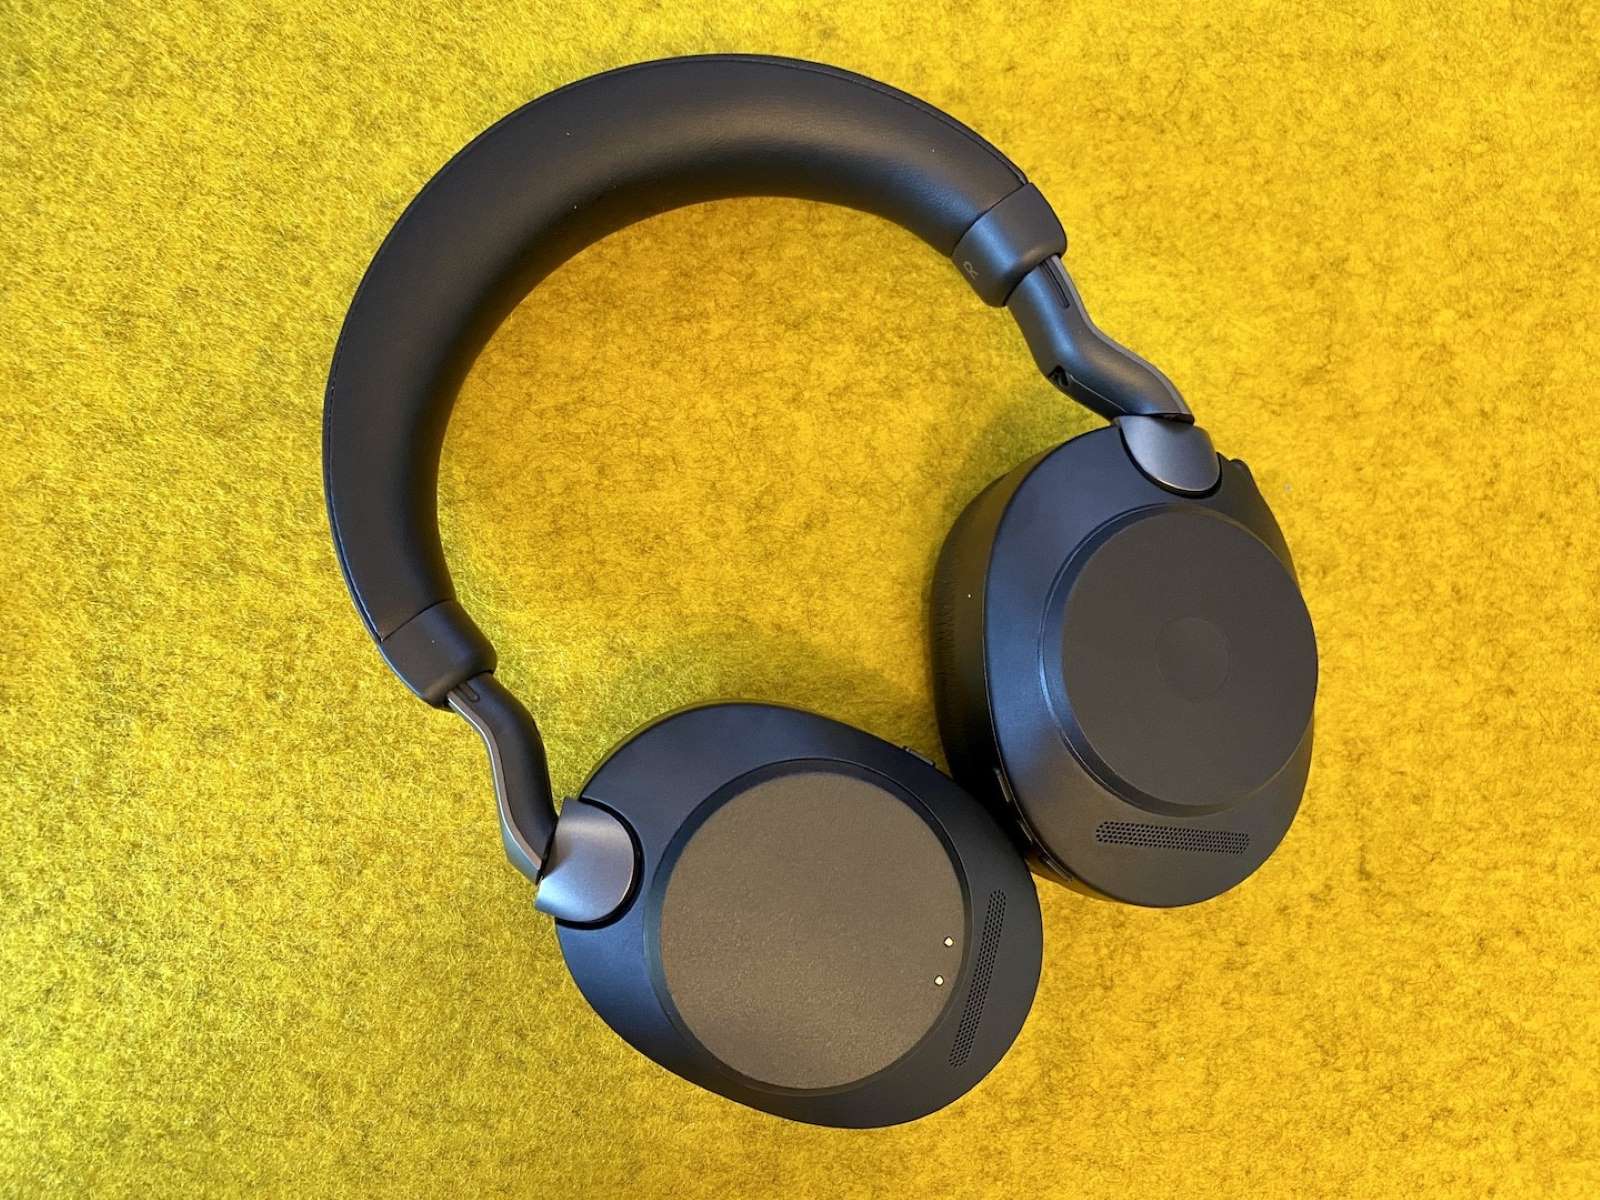 Resetting Your Jabra Headset: Easy Guide